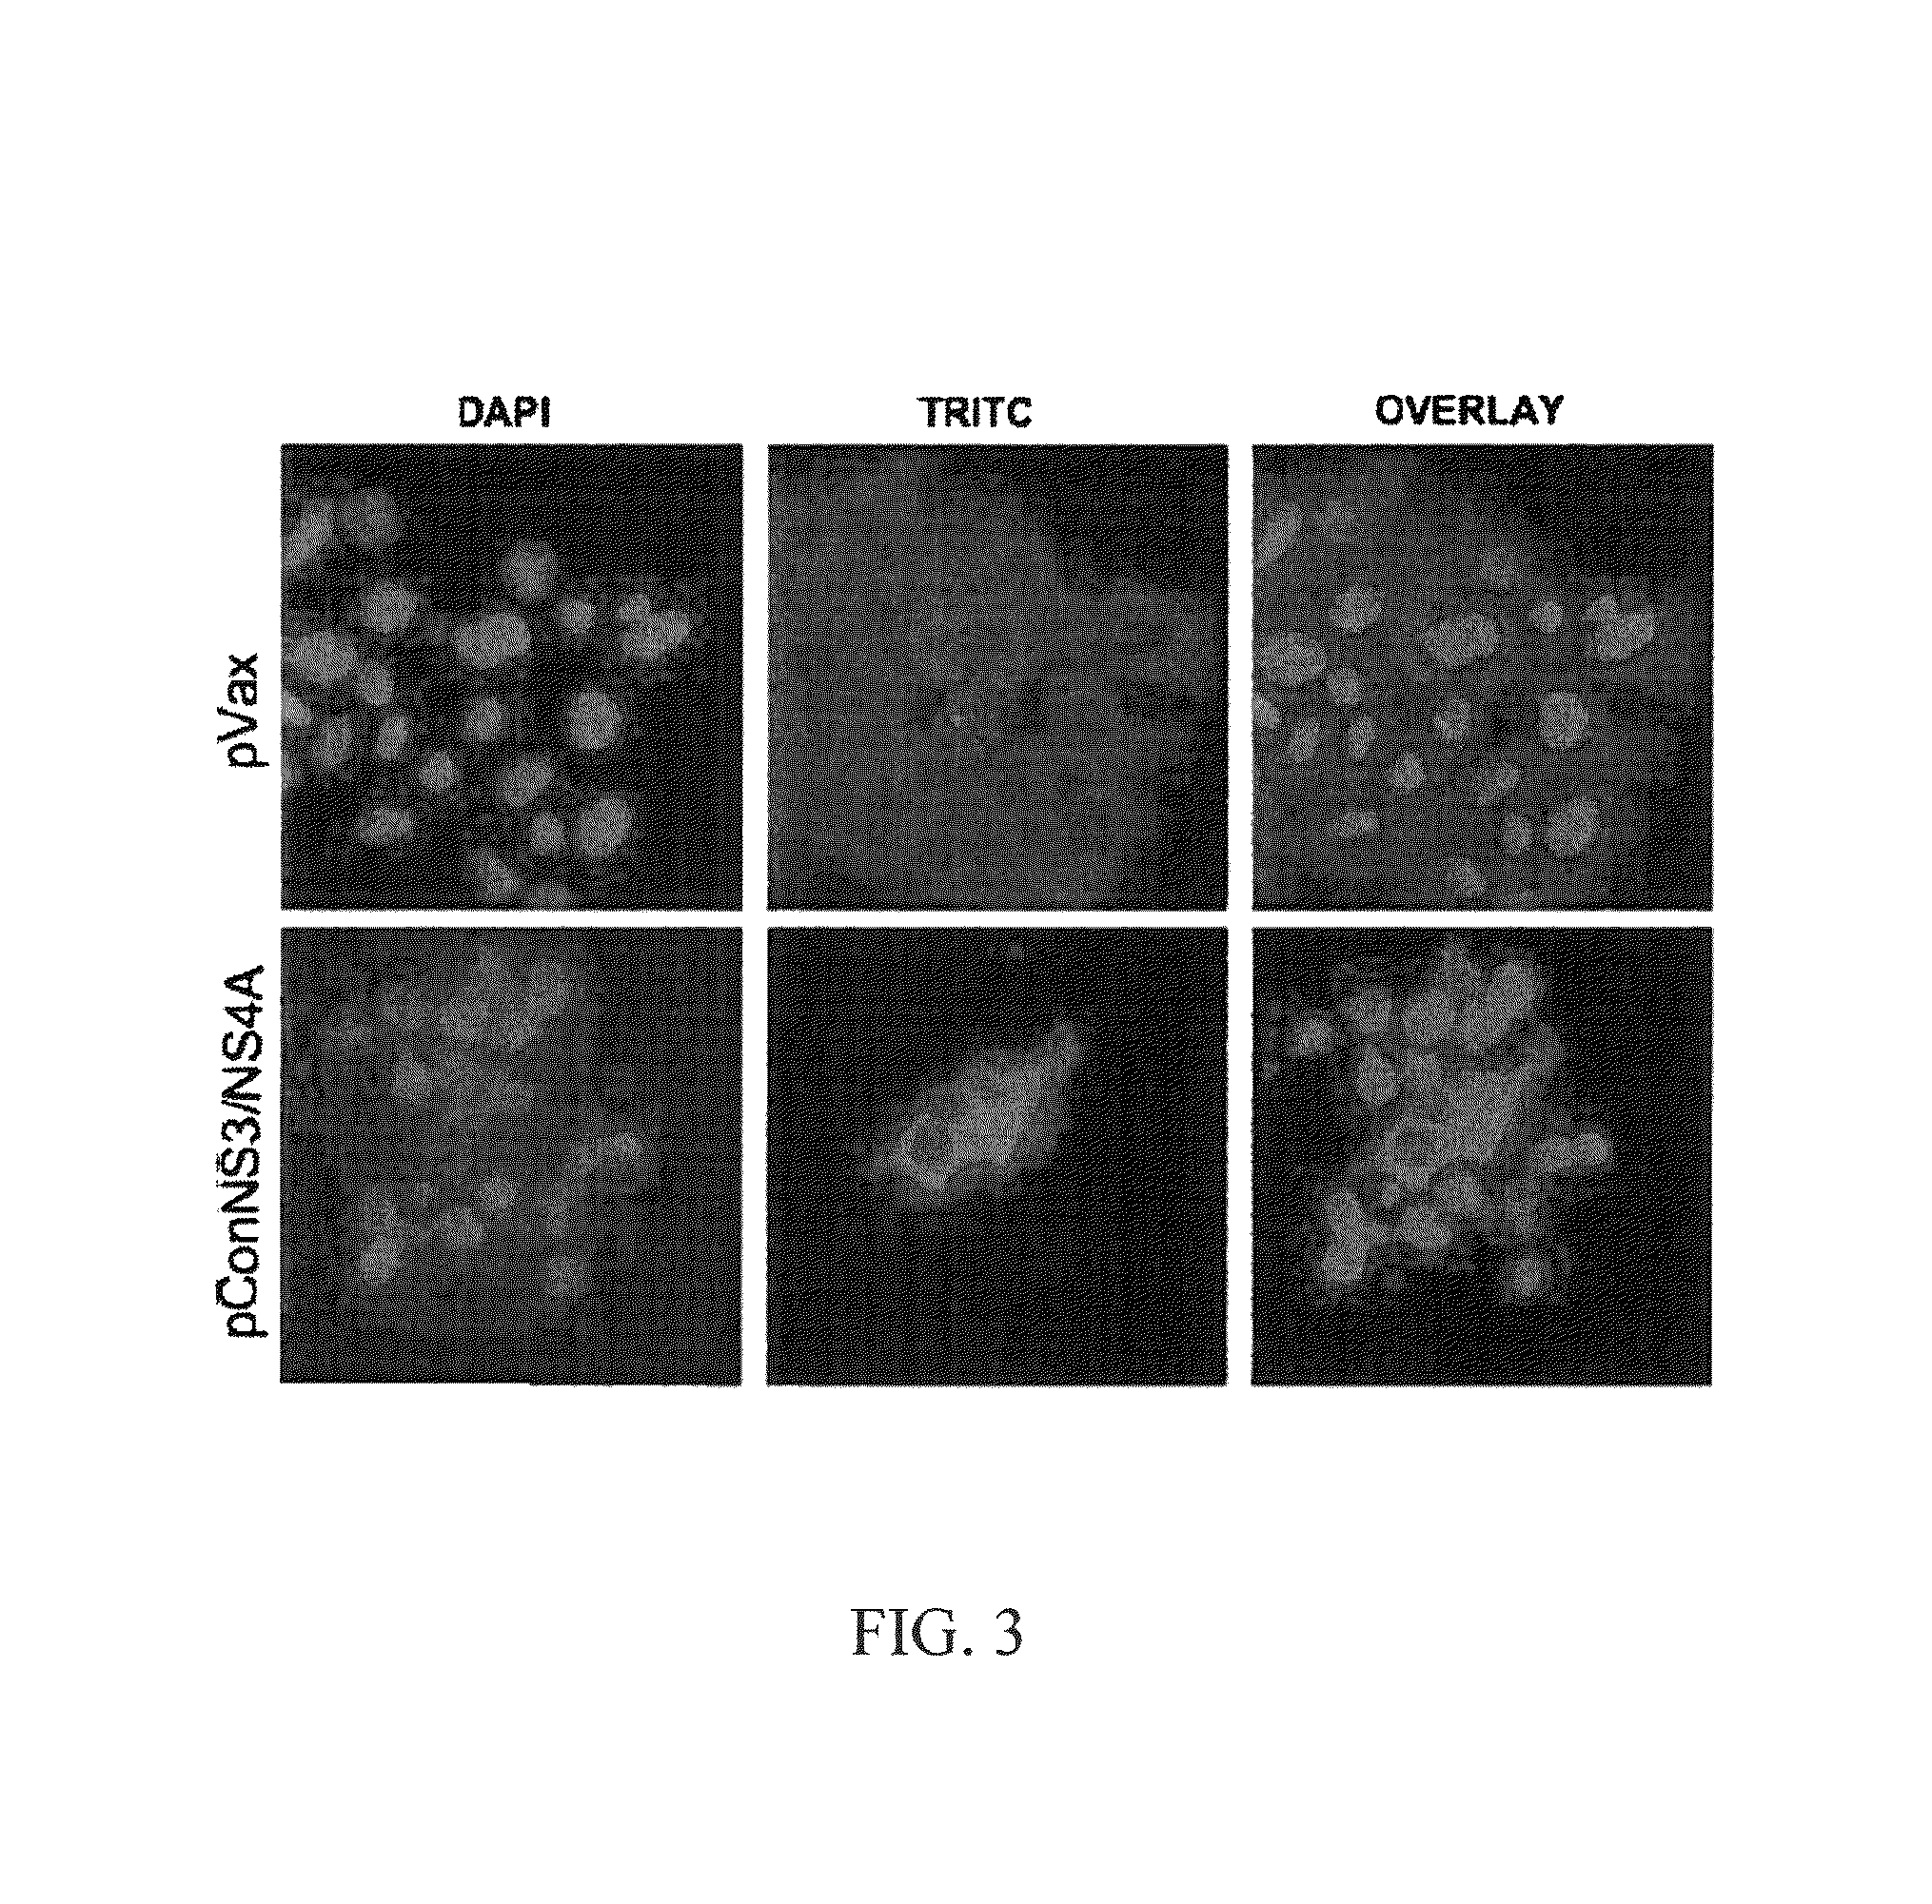 HCV vaccines and methods for using the same